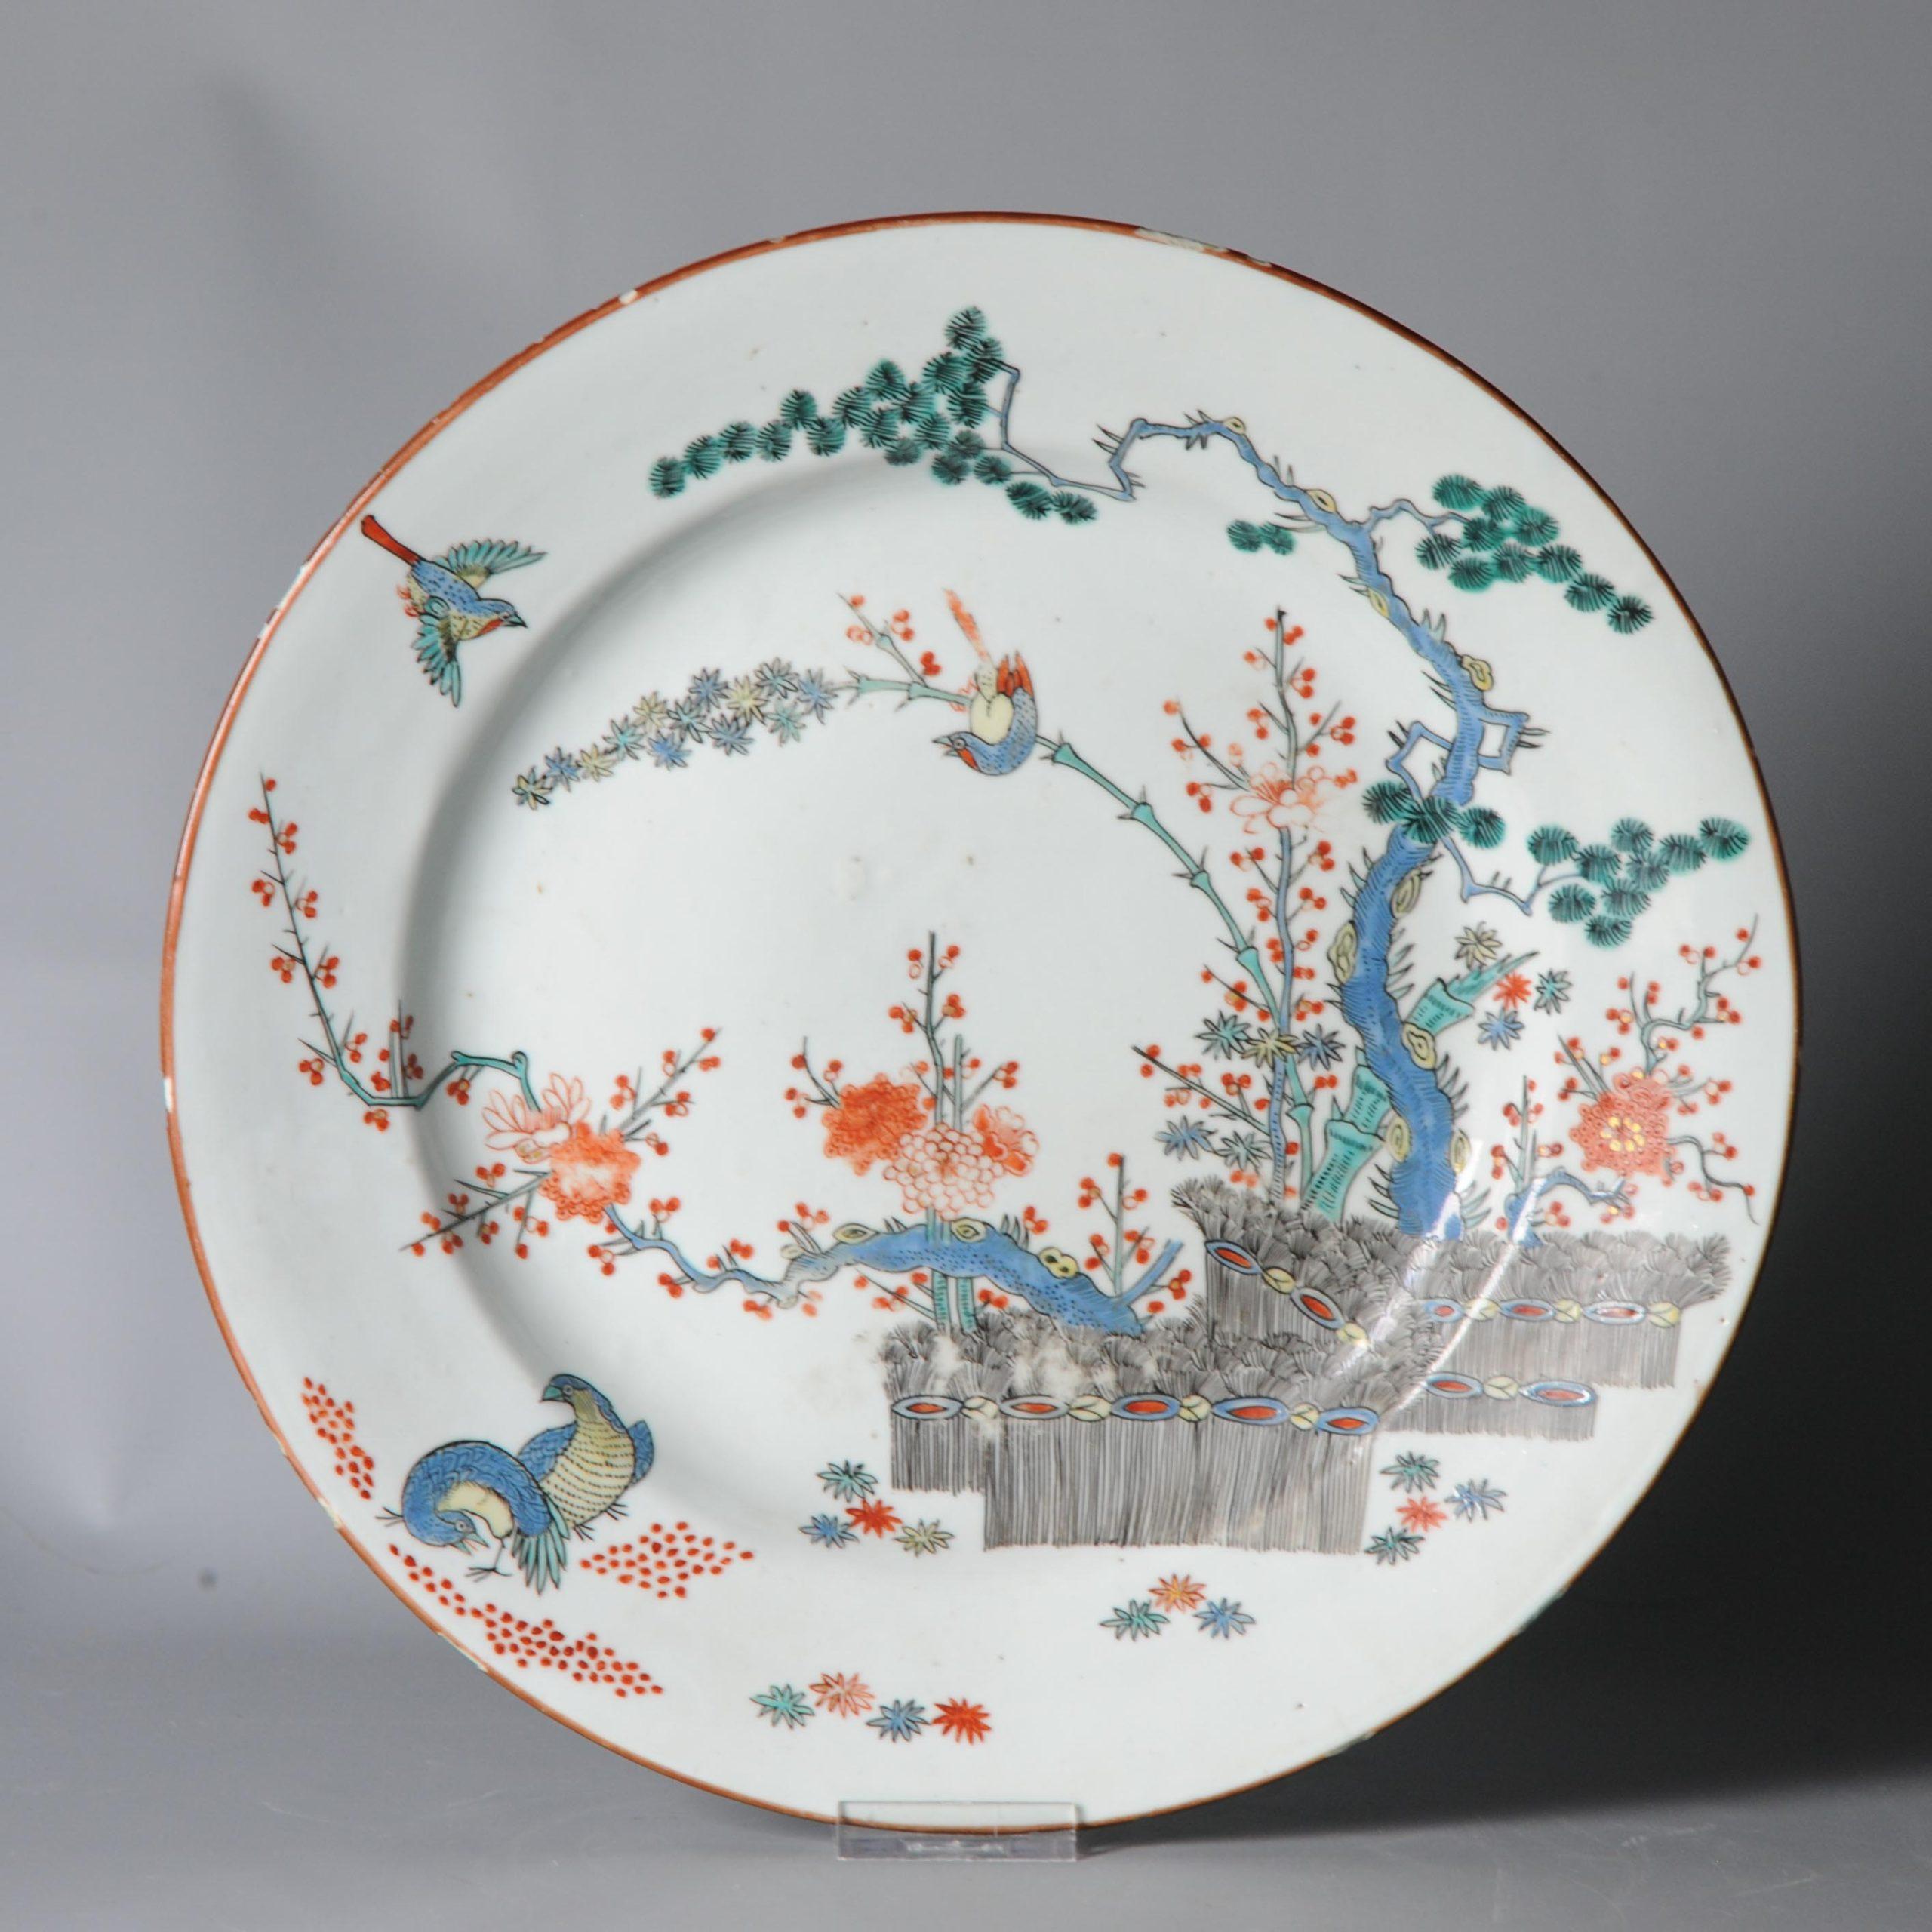 A Japanese Kakiemon-style bird, quail and Three friends of winter dish. Painted by by a Dutch painter to decorate a Chinese porcelain blank.

The scene and quality of paintting is amazing.

Three Friends of Winter
These are pine, Prunus mume